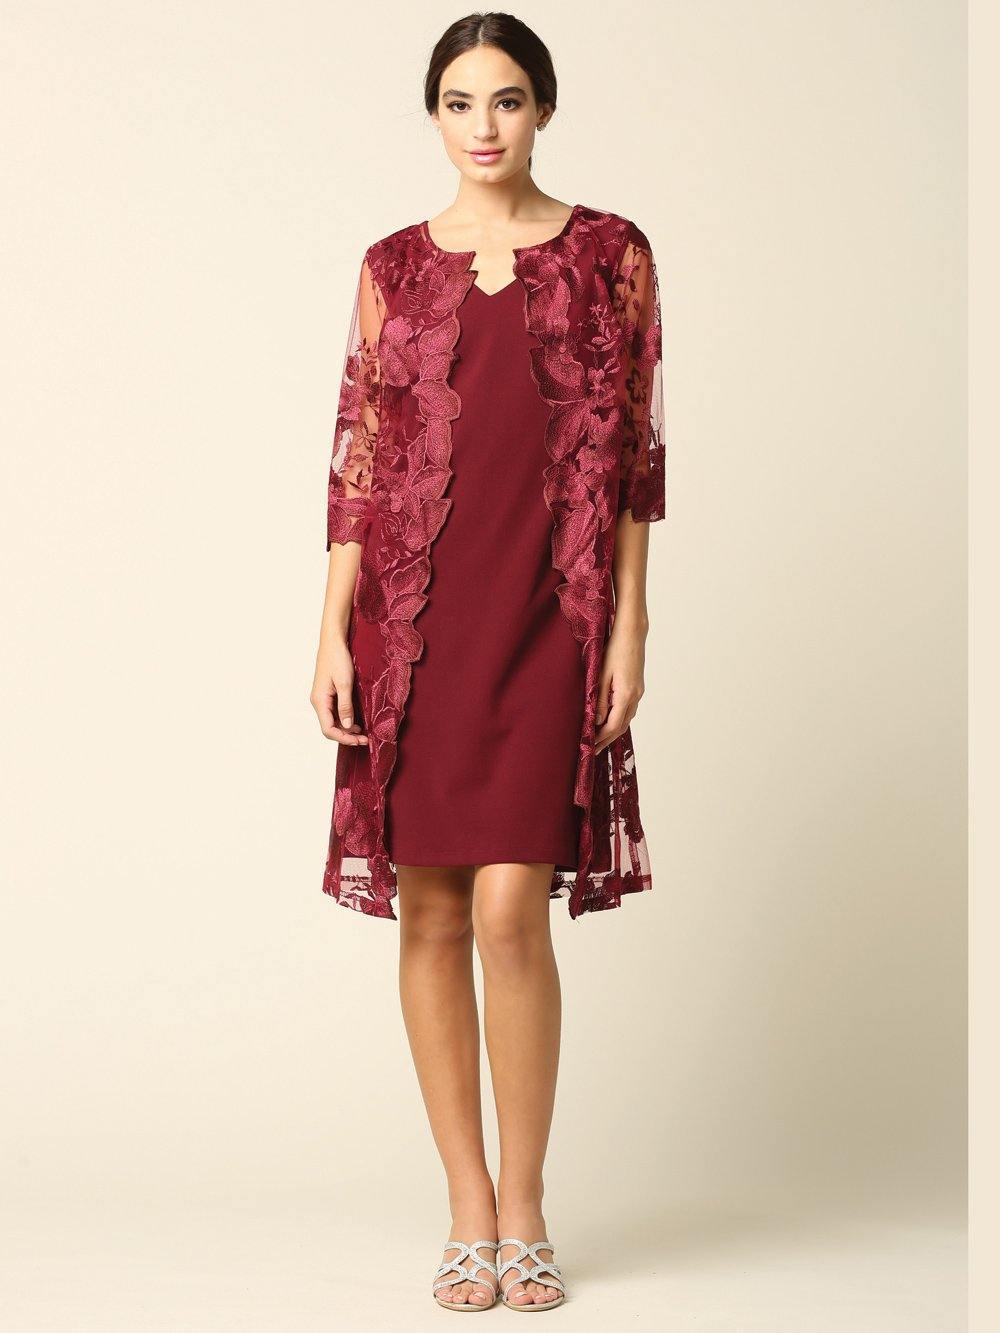 Short Mother of the Bride Chiffon Dress Sale - The Dress Outlet